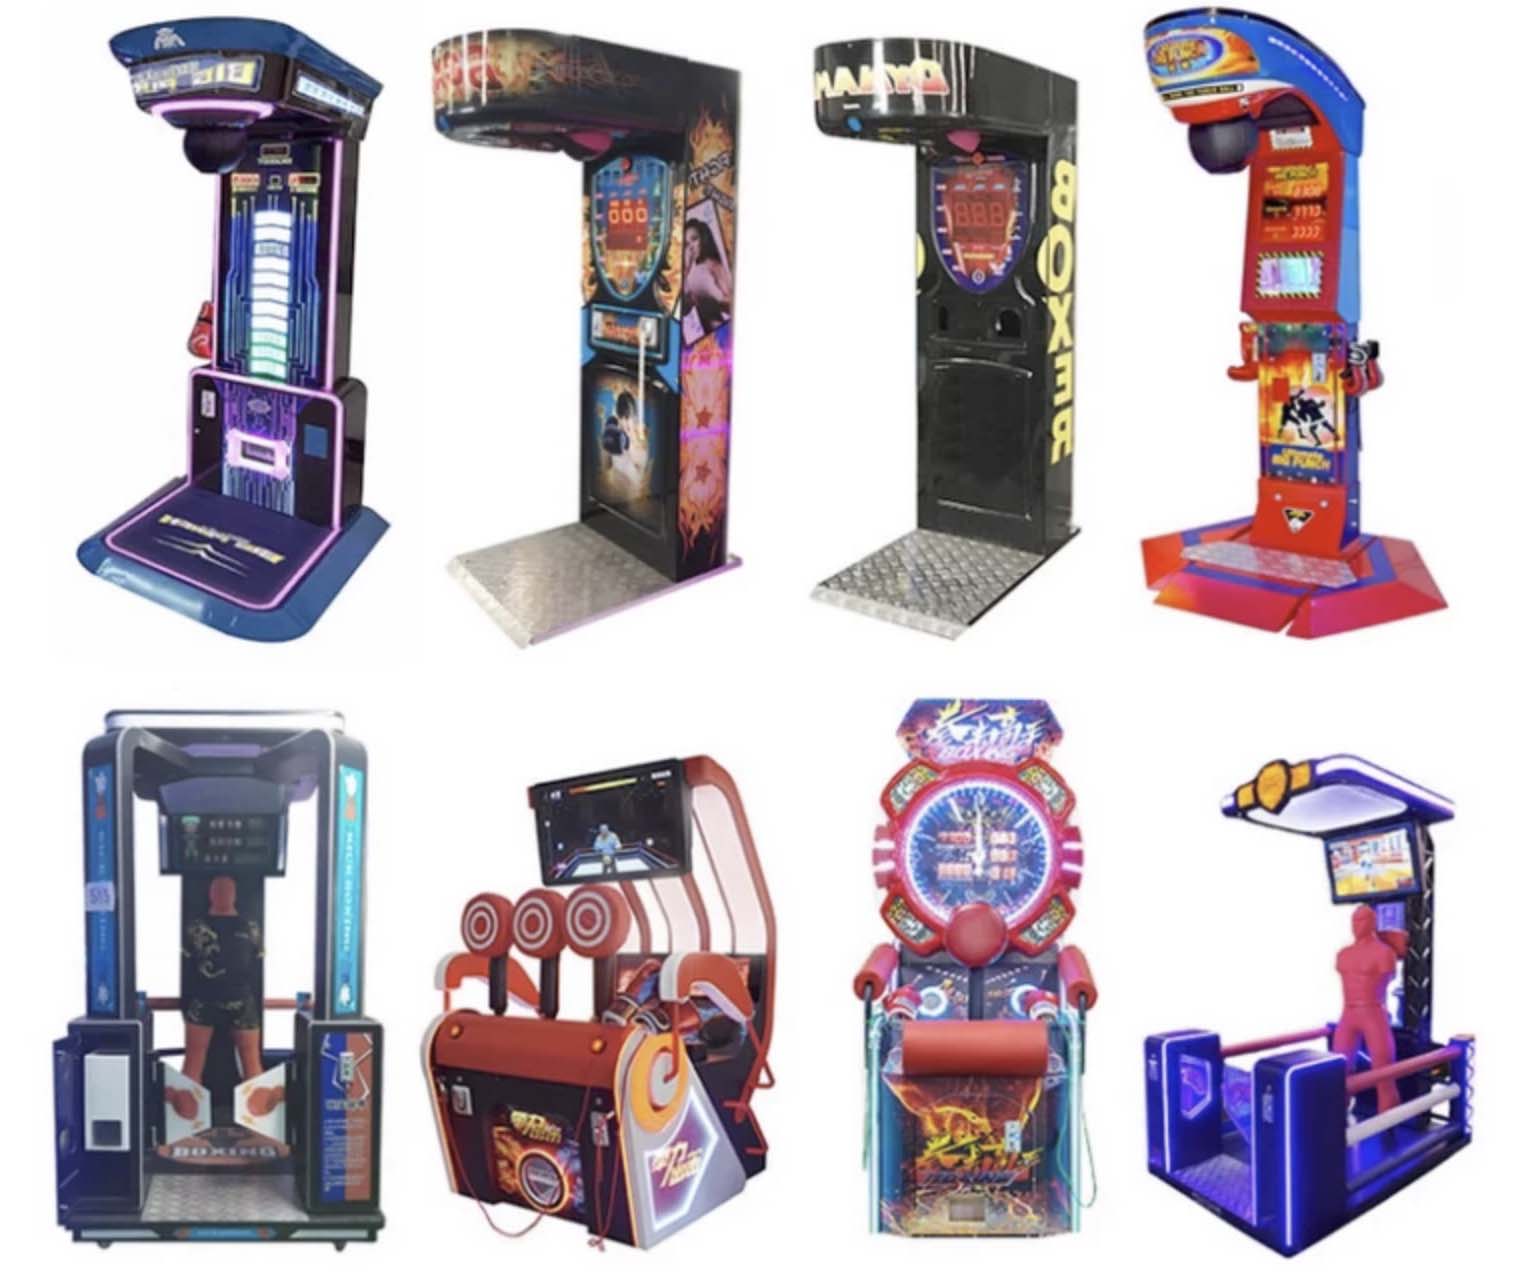 Key Factors Influencing Arcade Punching Machine Prices